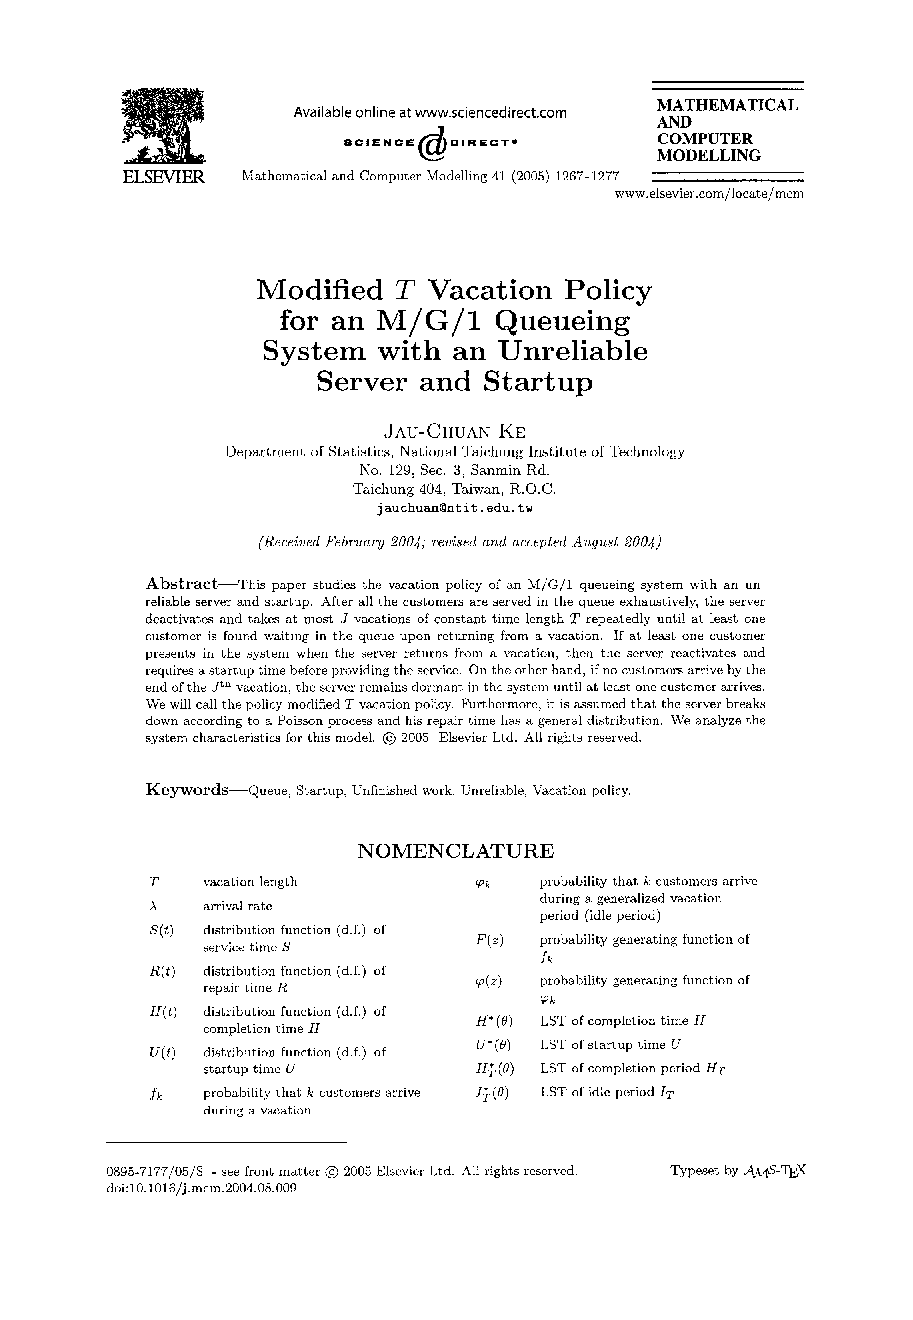 Modified T vacation policy for an M/G/1 queueing system with an unreliable server and startup